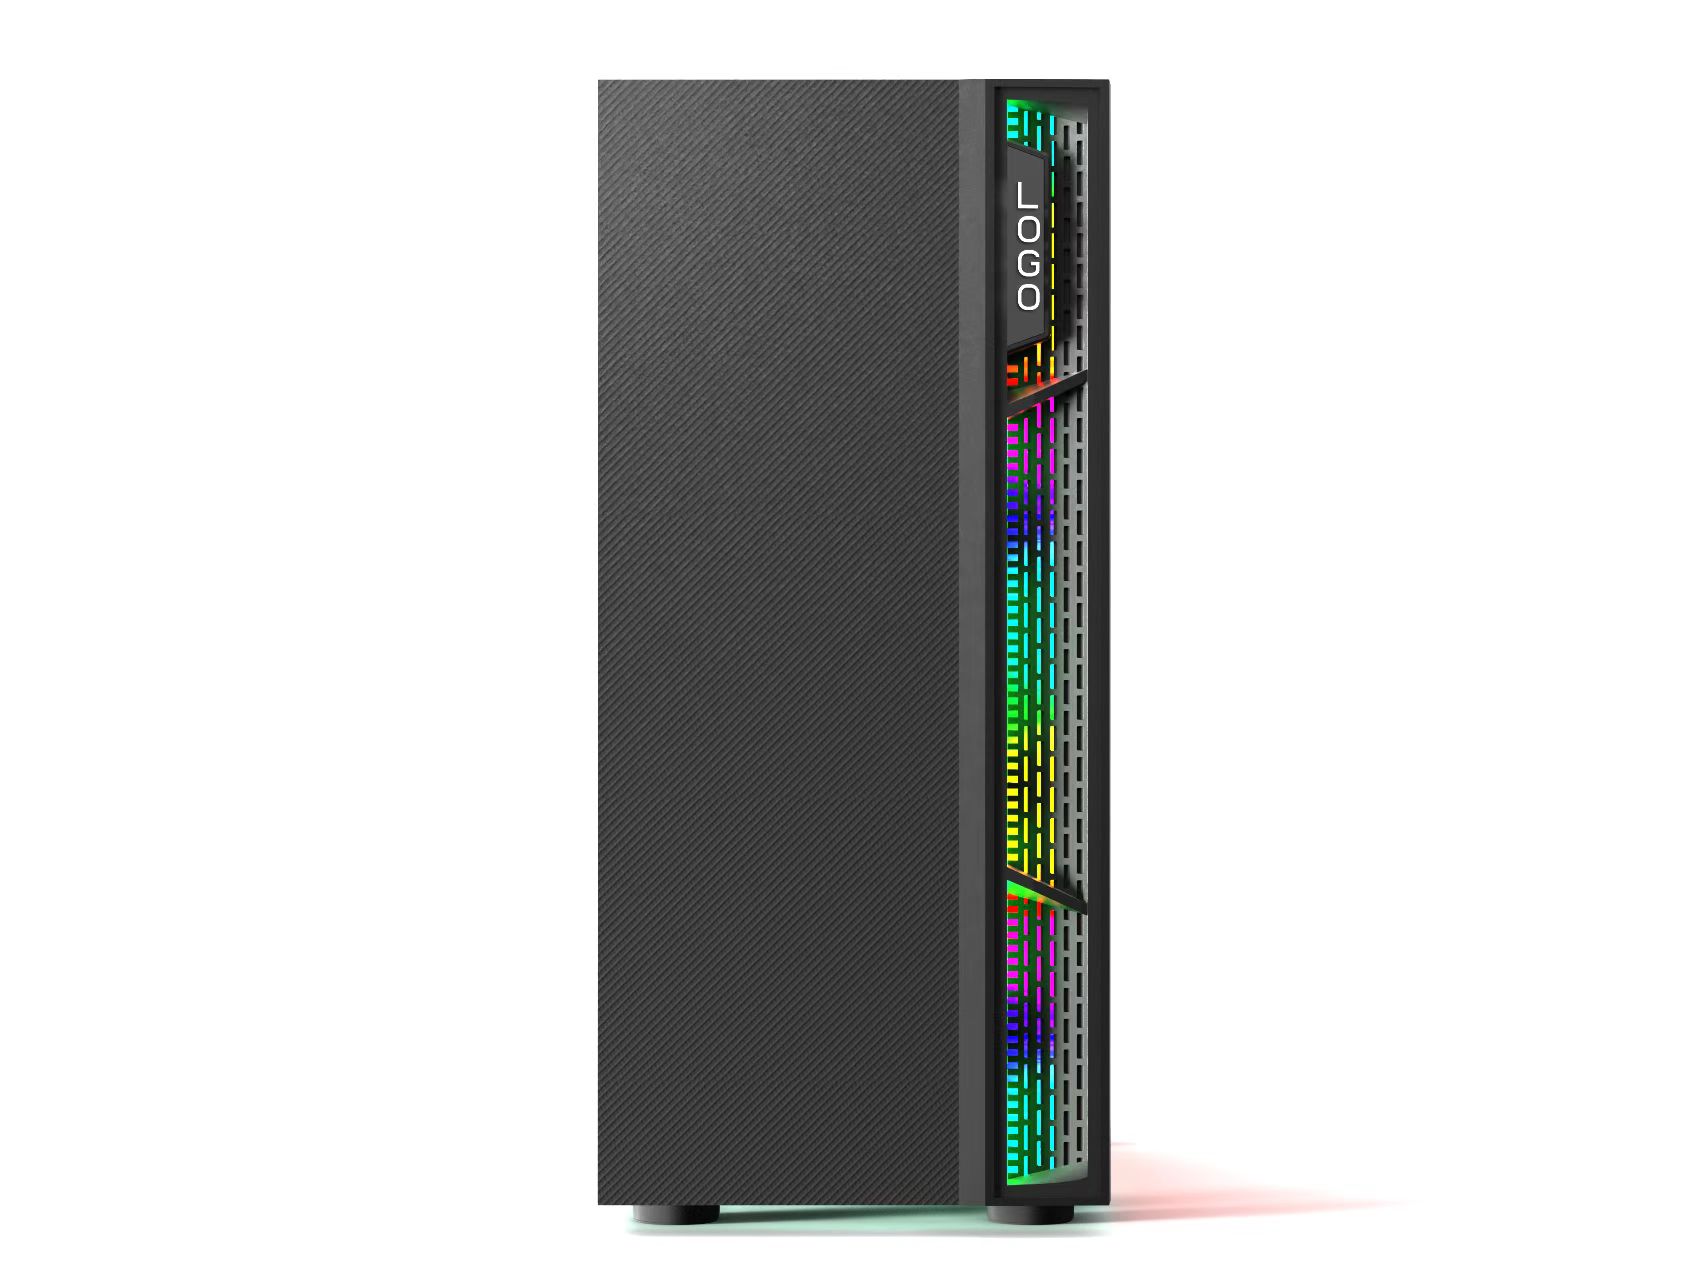 The latest Hot cool RGB light strip ATX desktop computer gaming case hinge tempered glass side